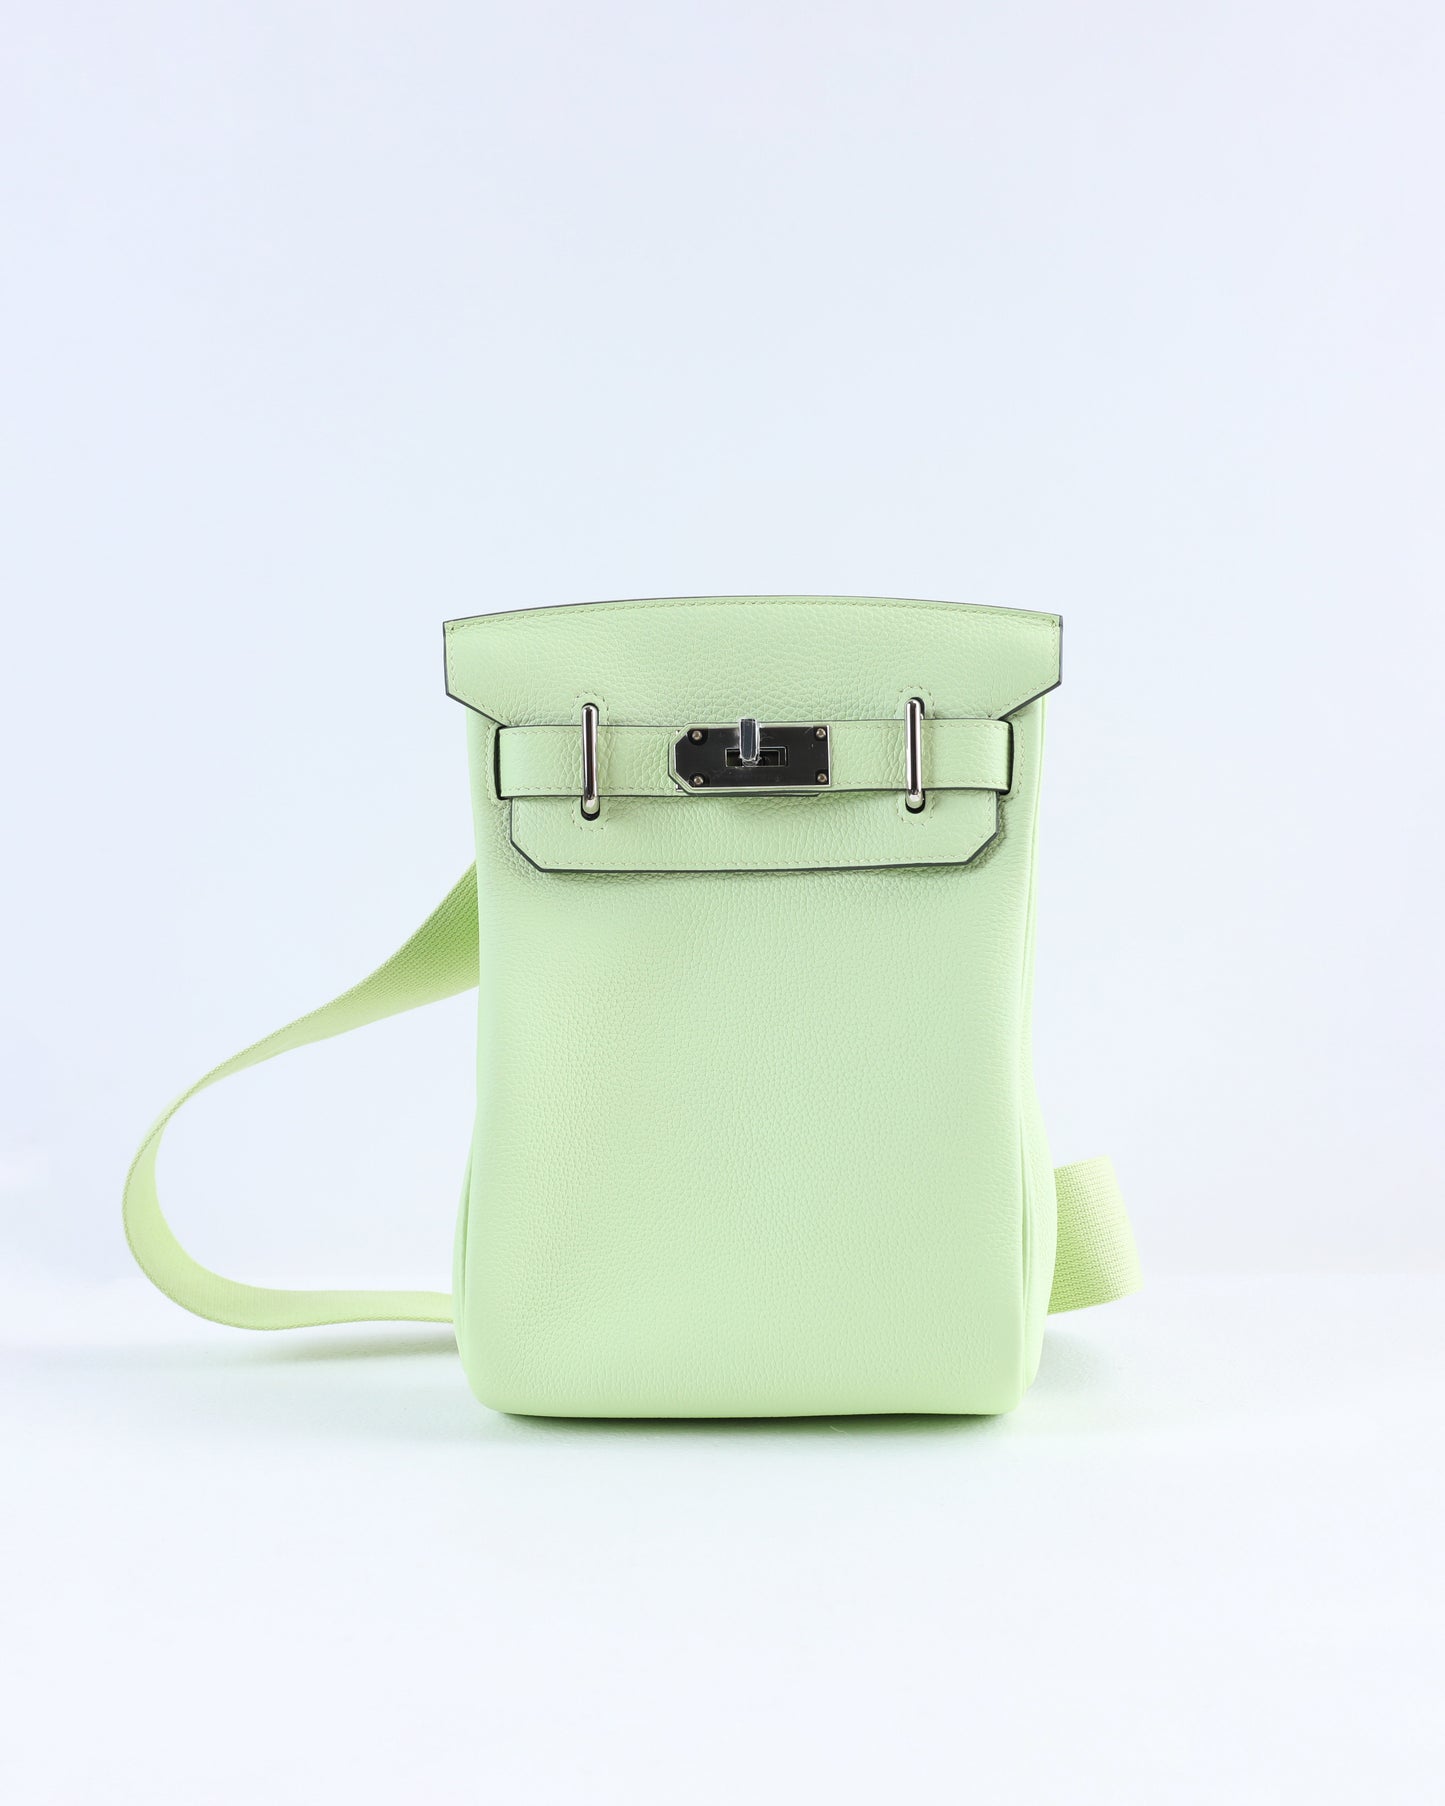 Hac A Dos PM Backpack Vert Absinthe in Togo Leather with Palladium Hardware